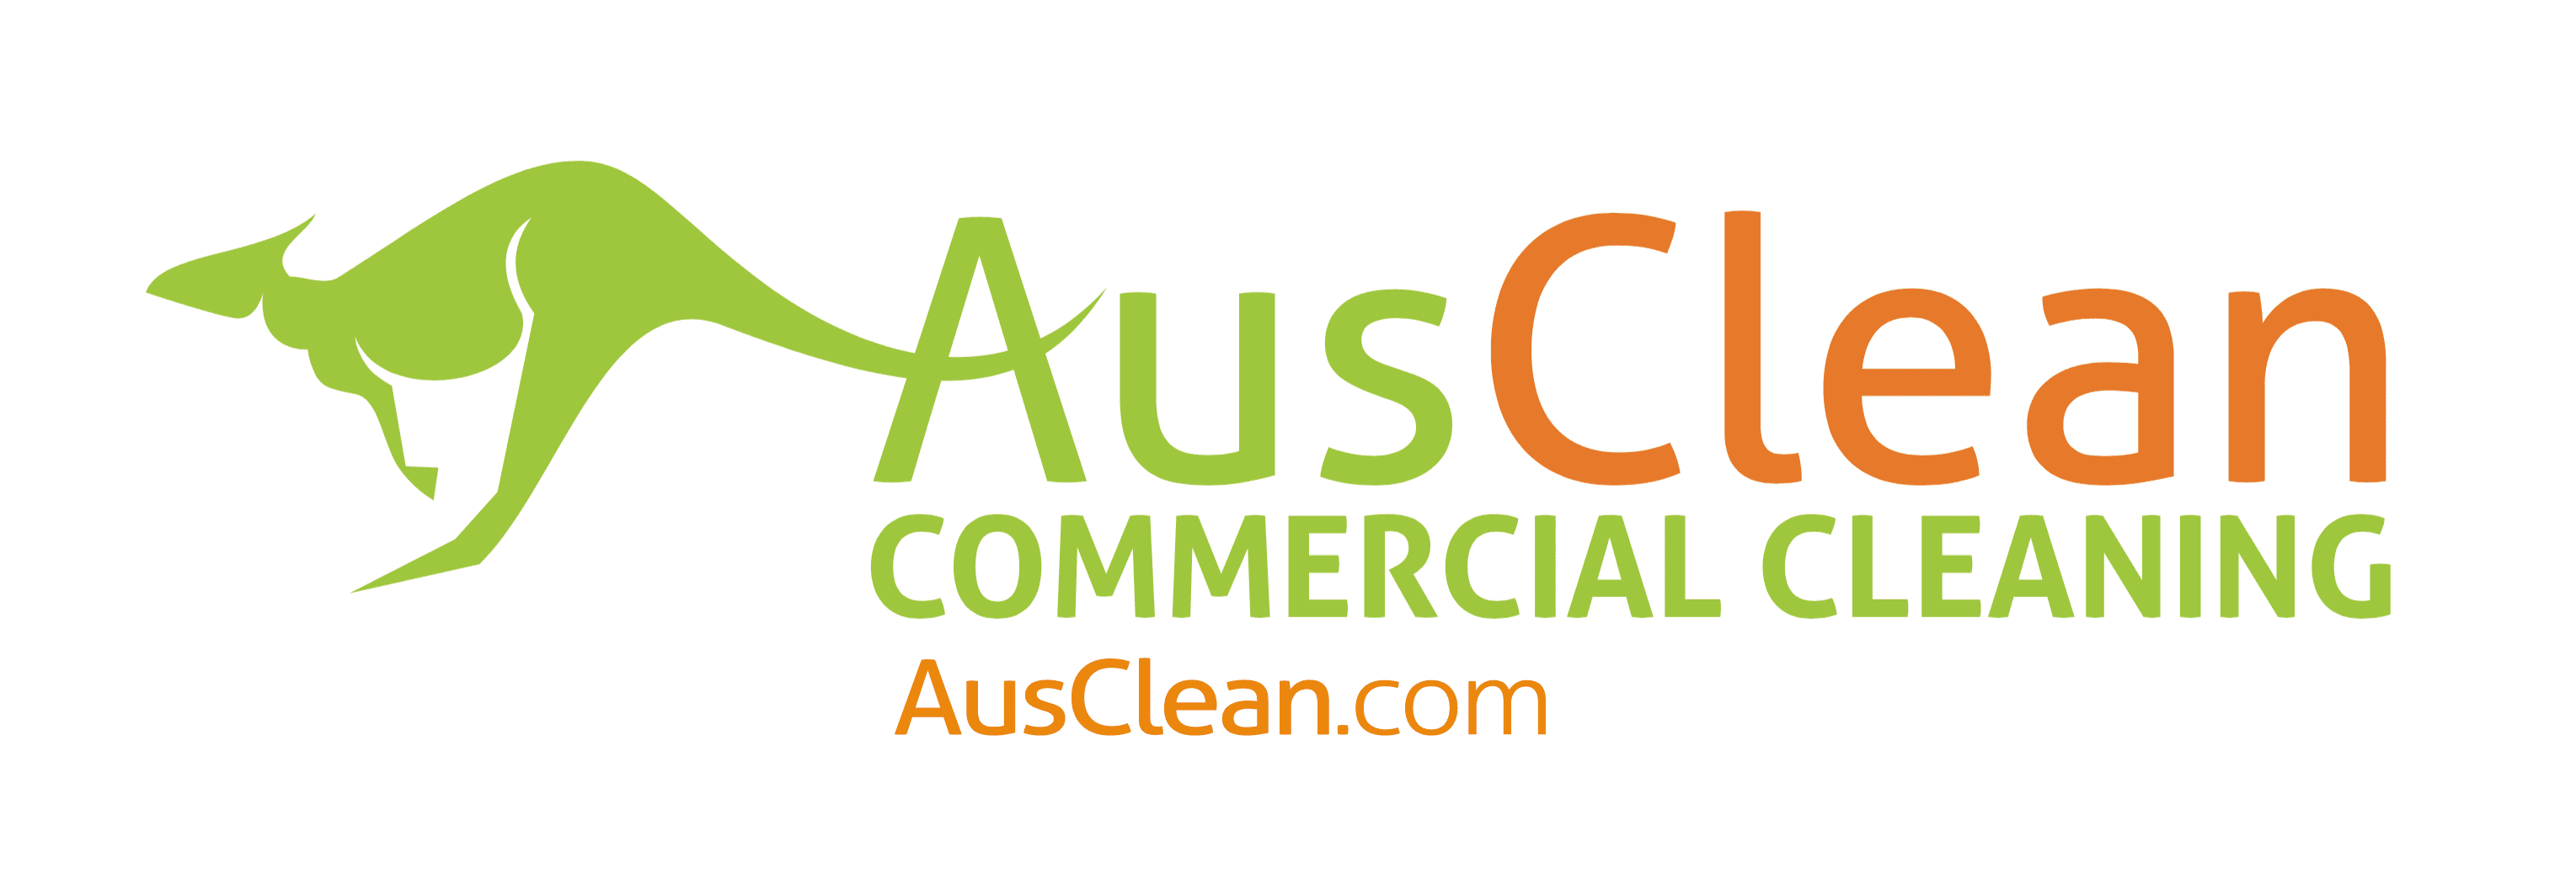 AusClean | Commercial Cleaning Services